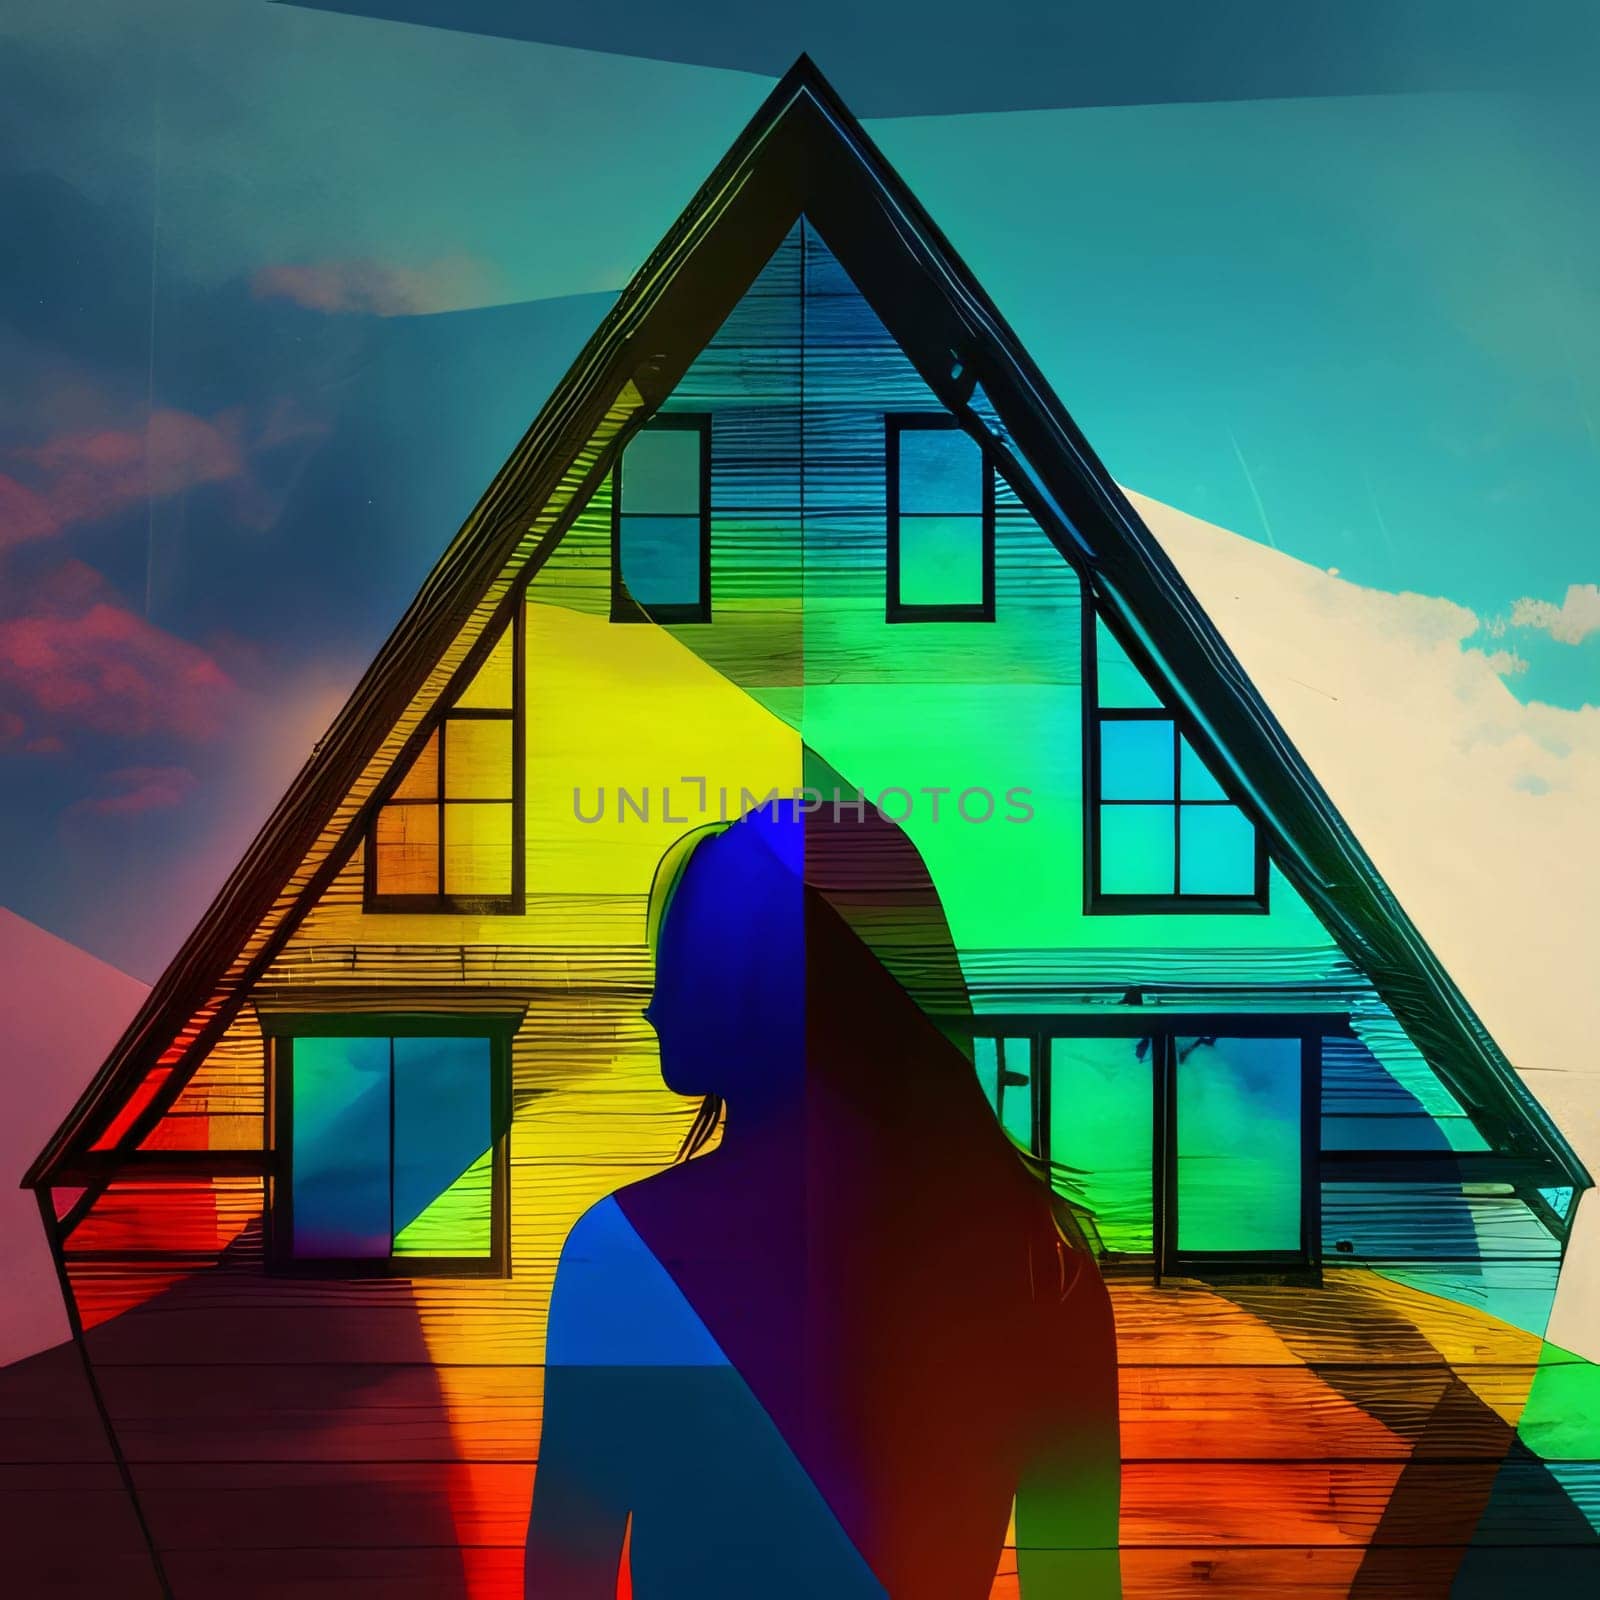 Abstract illustration, house with triangular roof and silhouette of Woman. Symbol of women's freedom. A month of pride in being a woman.